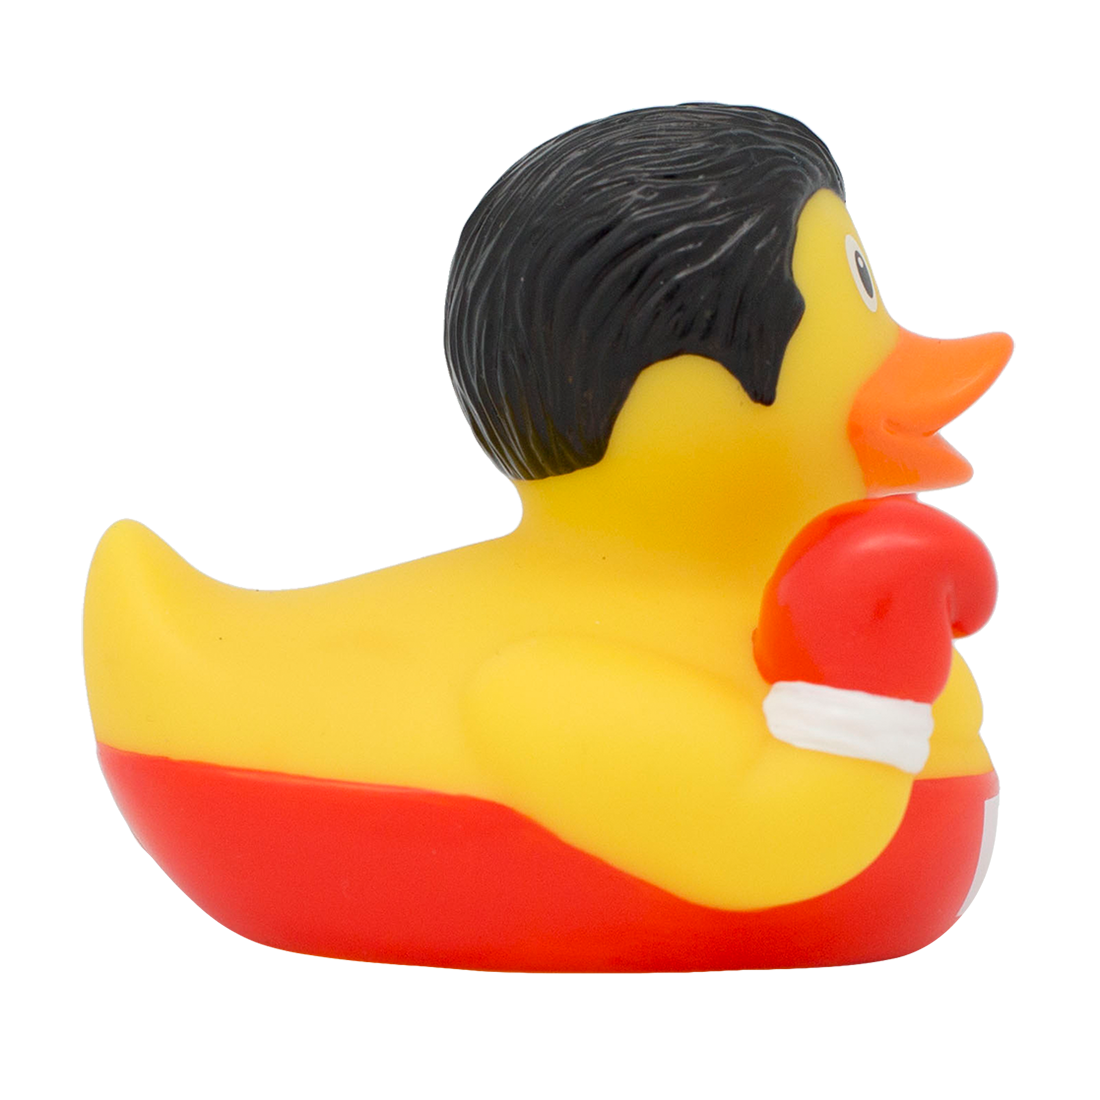 LILALU - SHARE HAPPINESS -Boxing rubber duck | LILALU